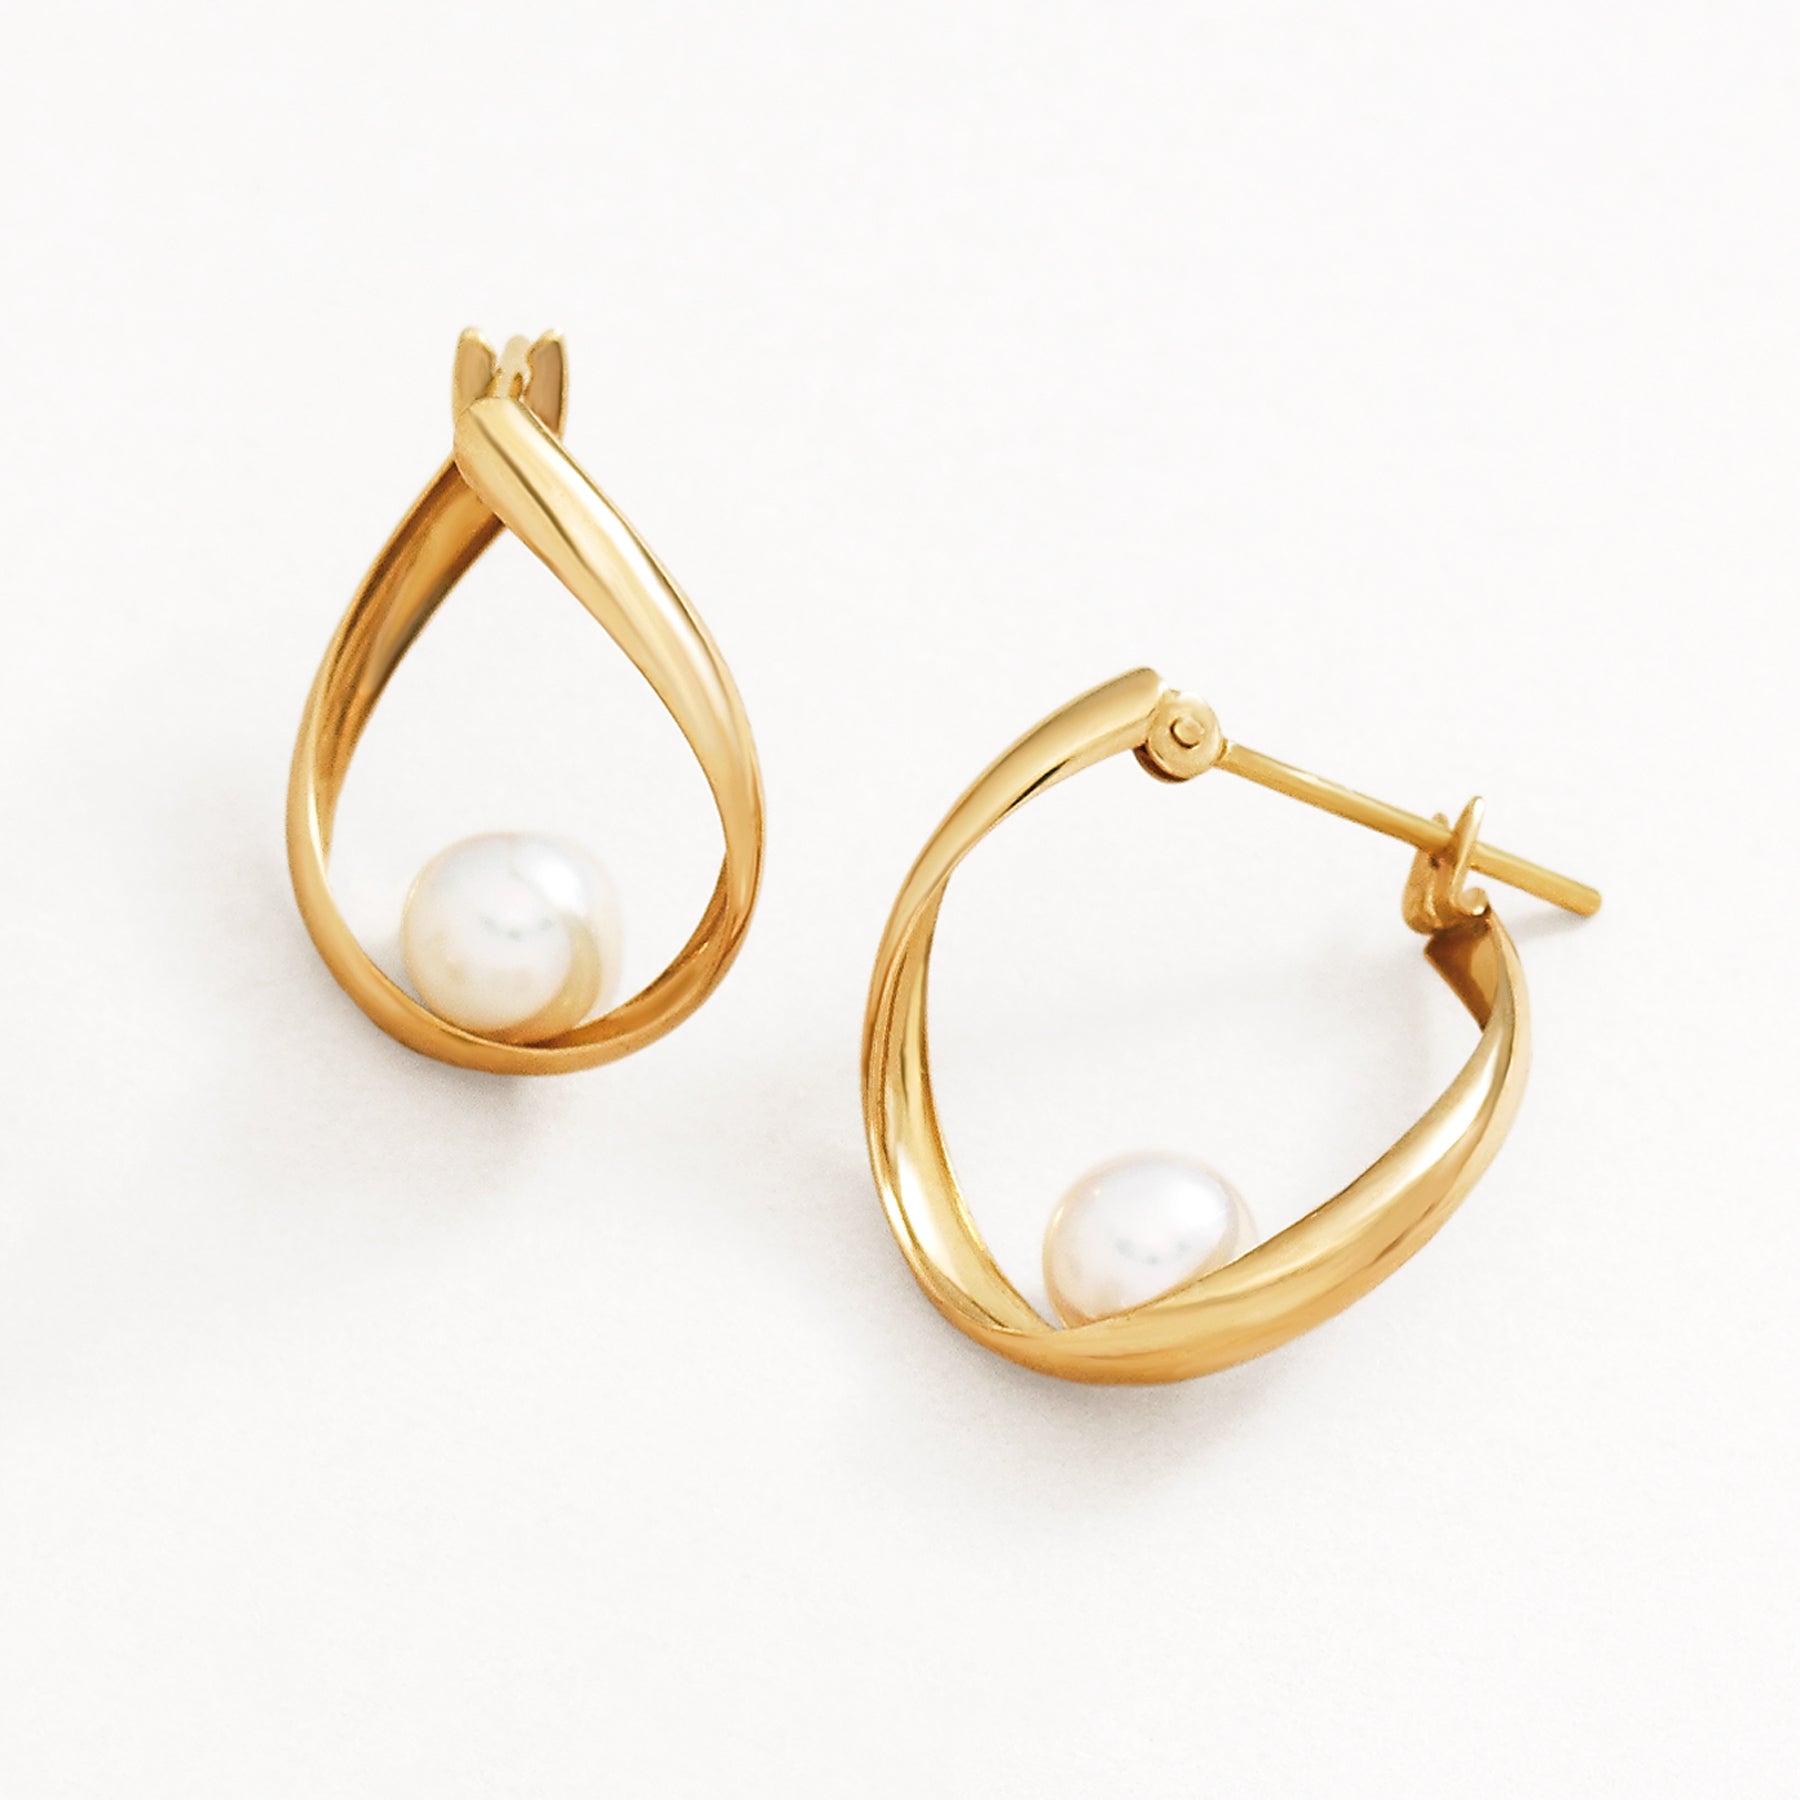 18K / 10K Yellow Gold Twisted Hoop Pearl Earrings Small - Product Image